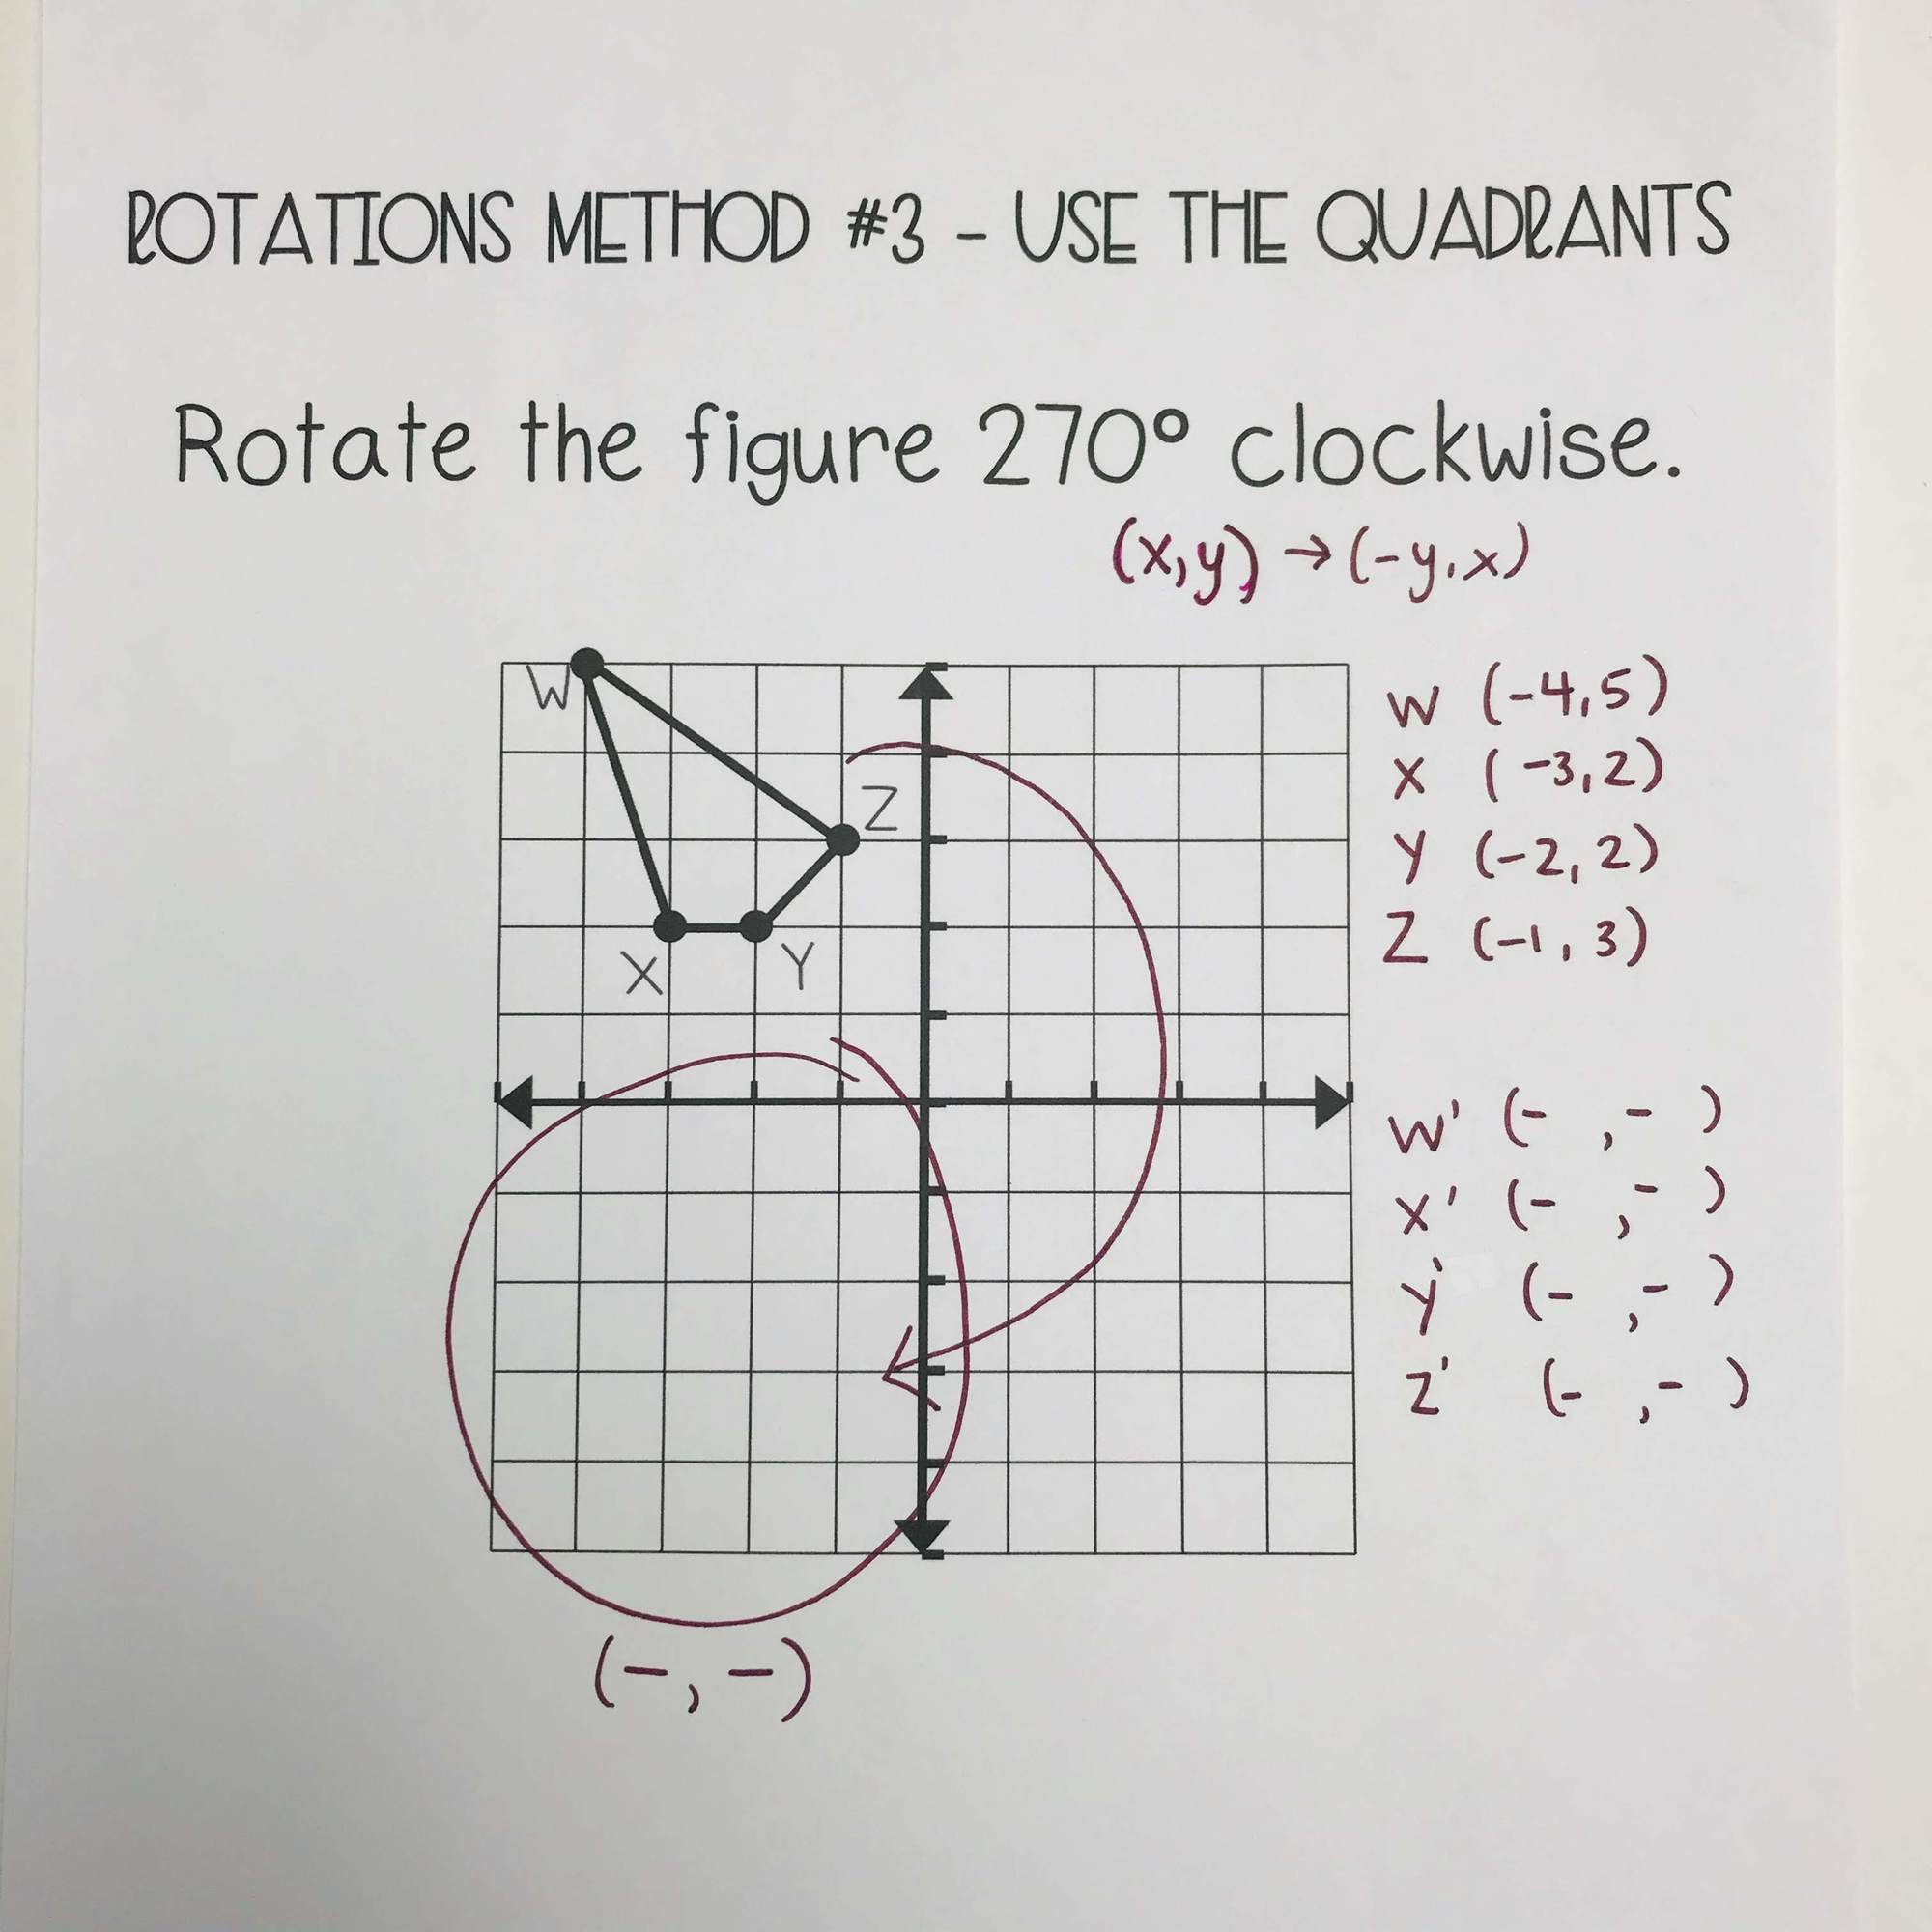 rule for a 270 rotation clockwise geometry